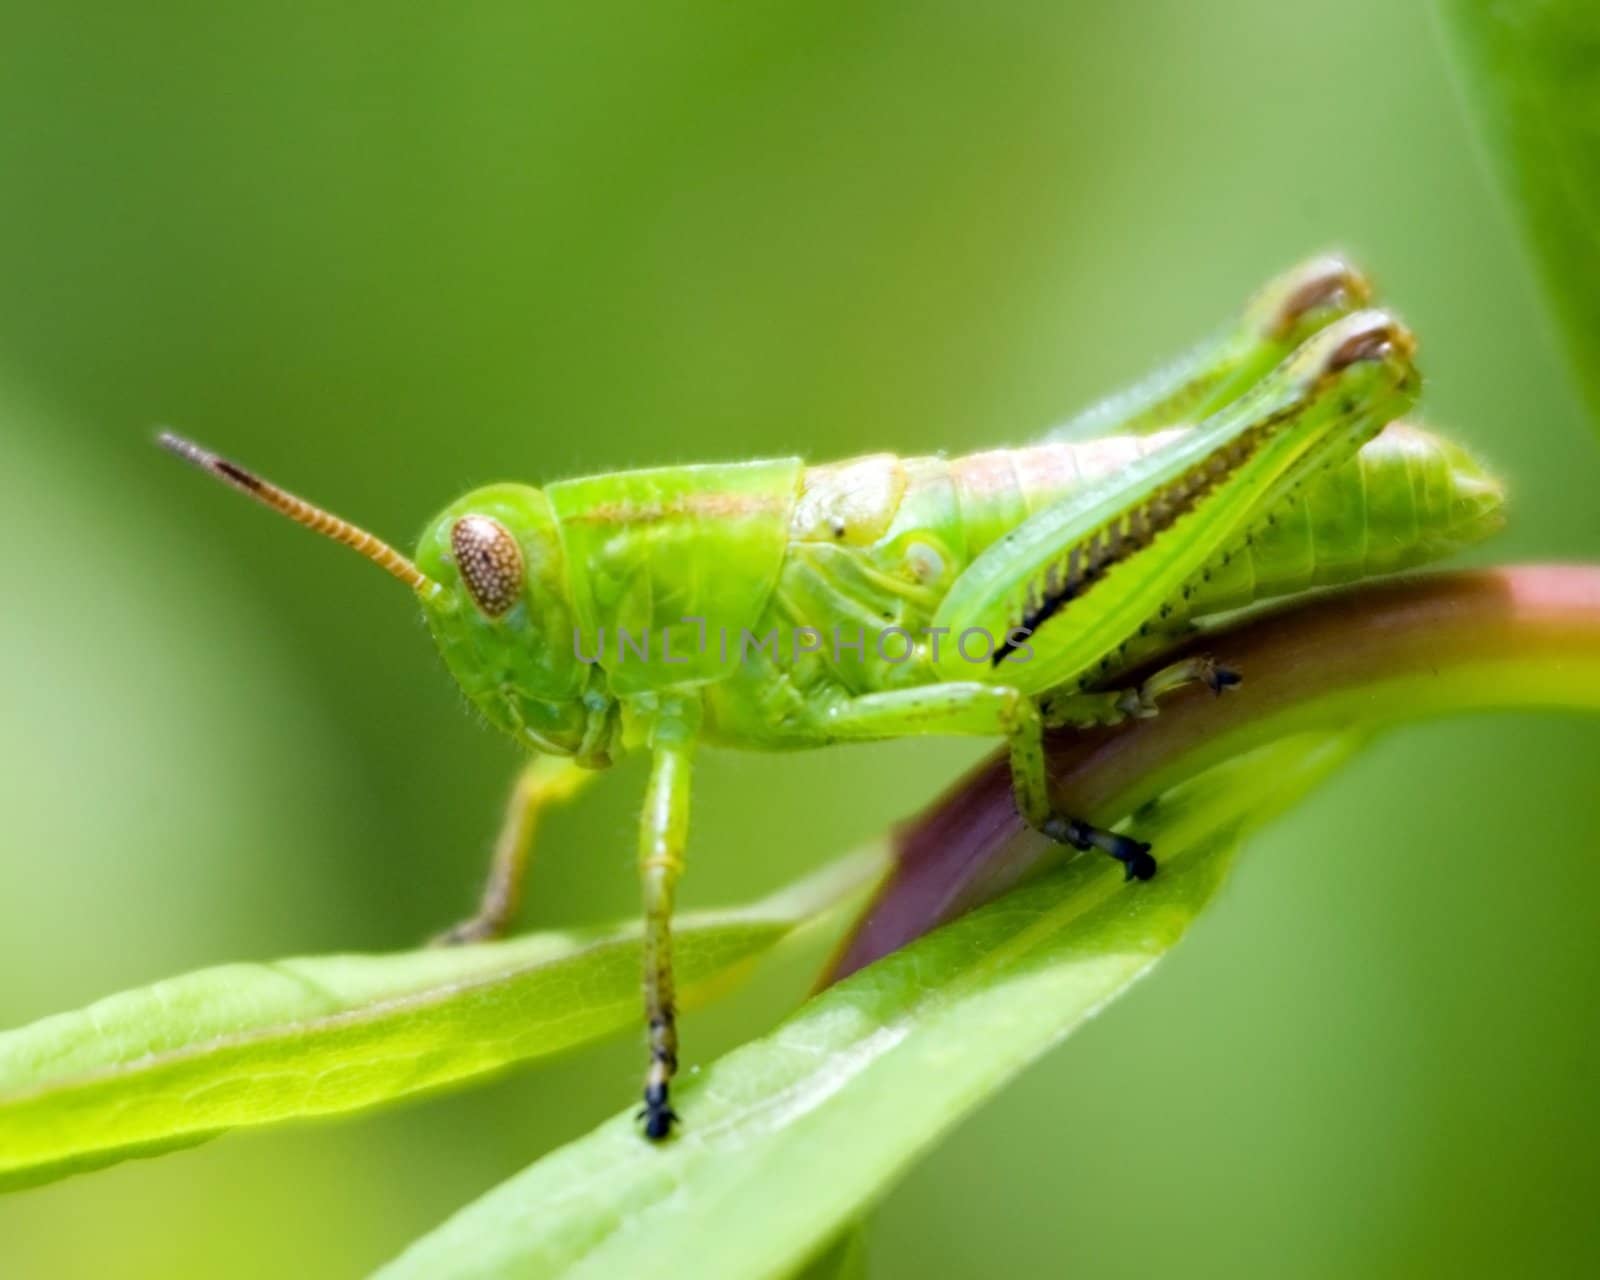 A grasshopper perched on a blade of grass.